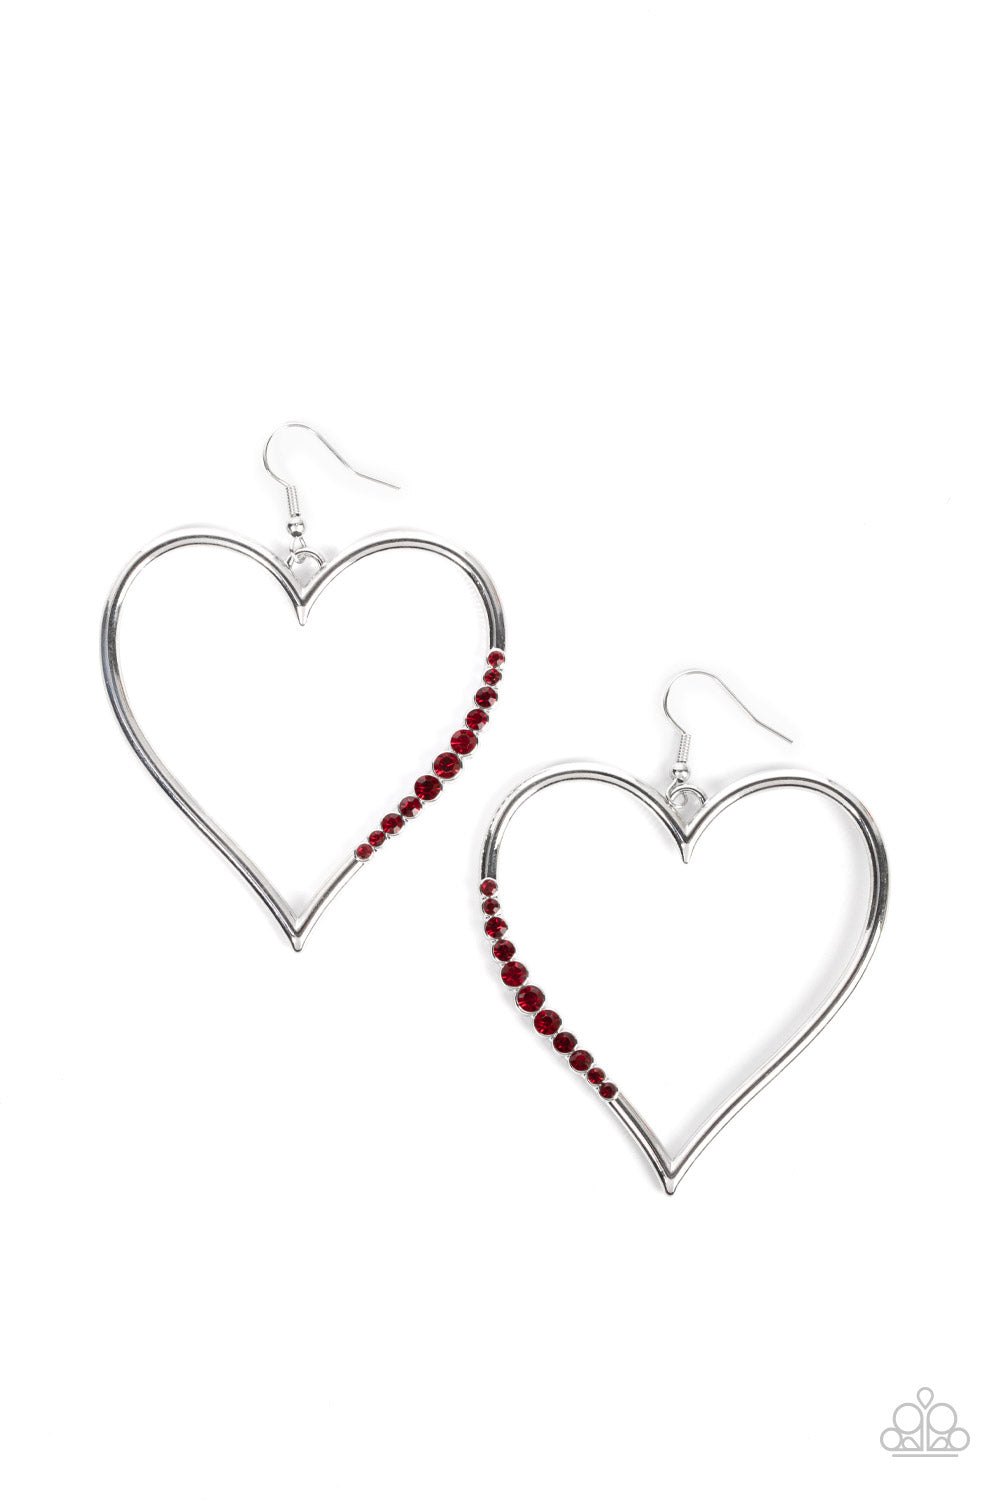 Paparazzi ♥ Bewitched Kiss - Red ♥ Earrings